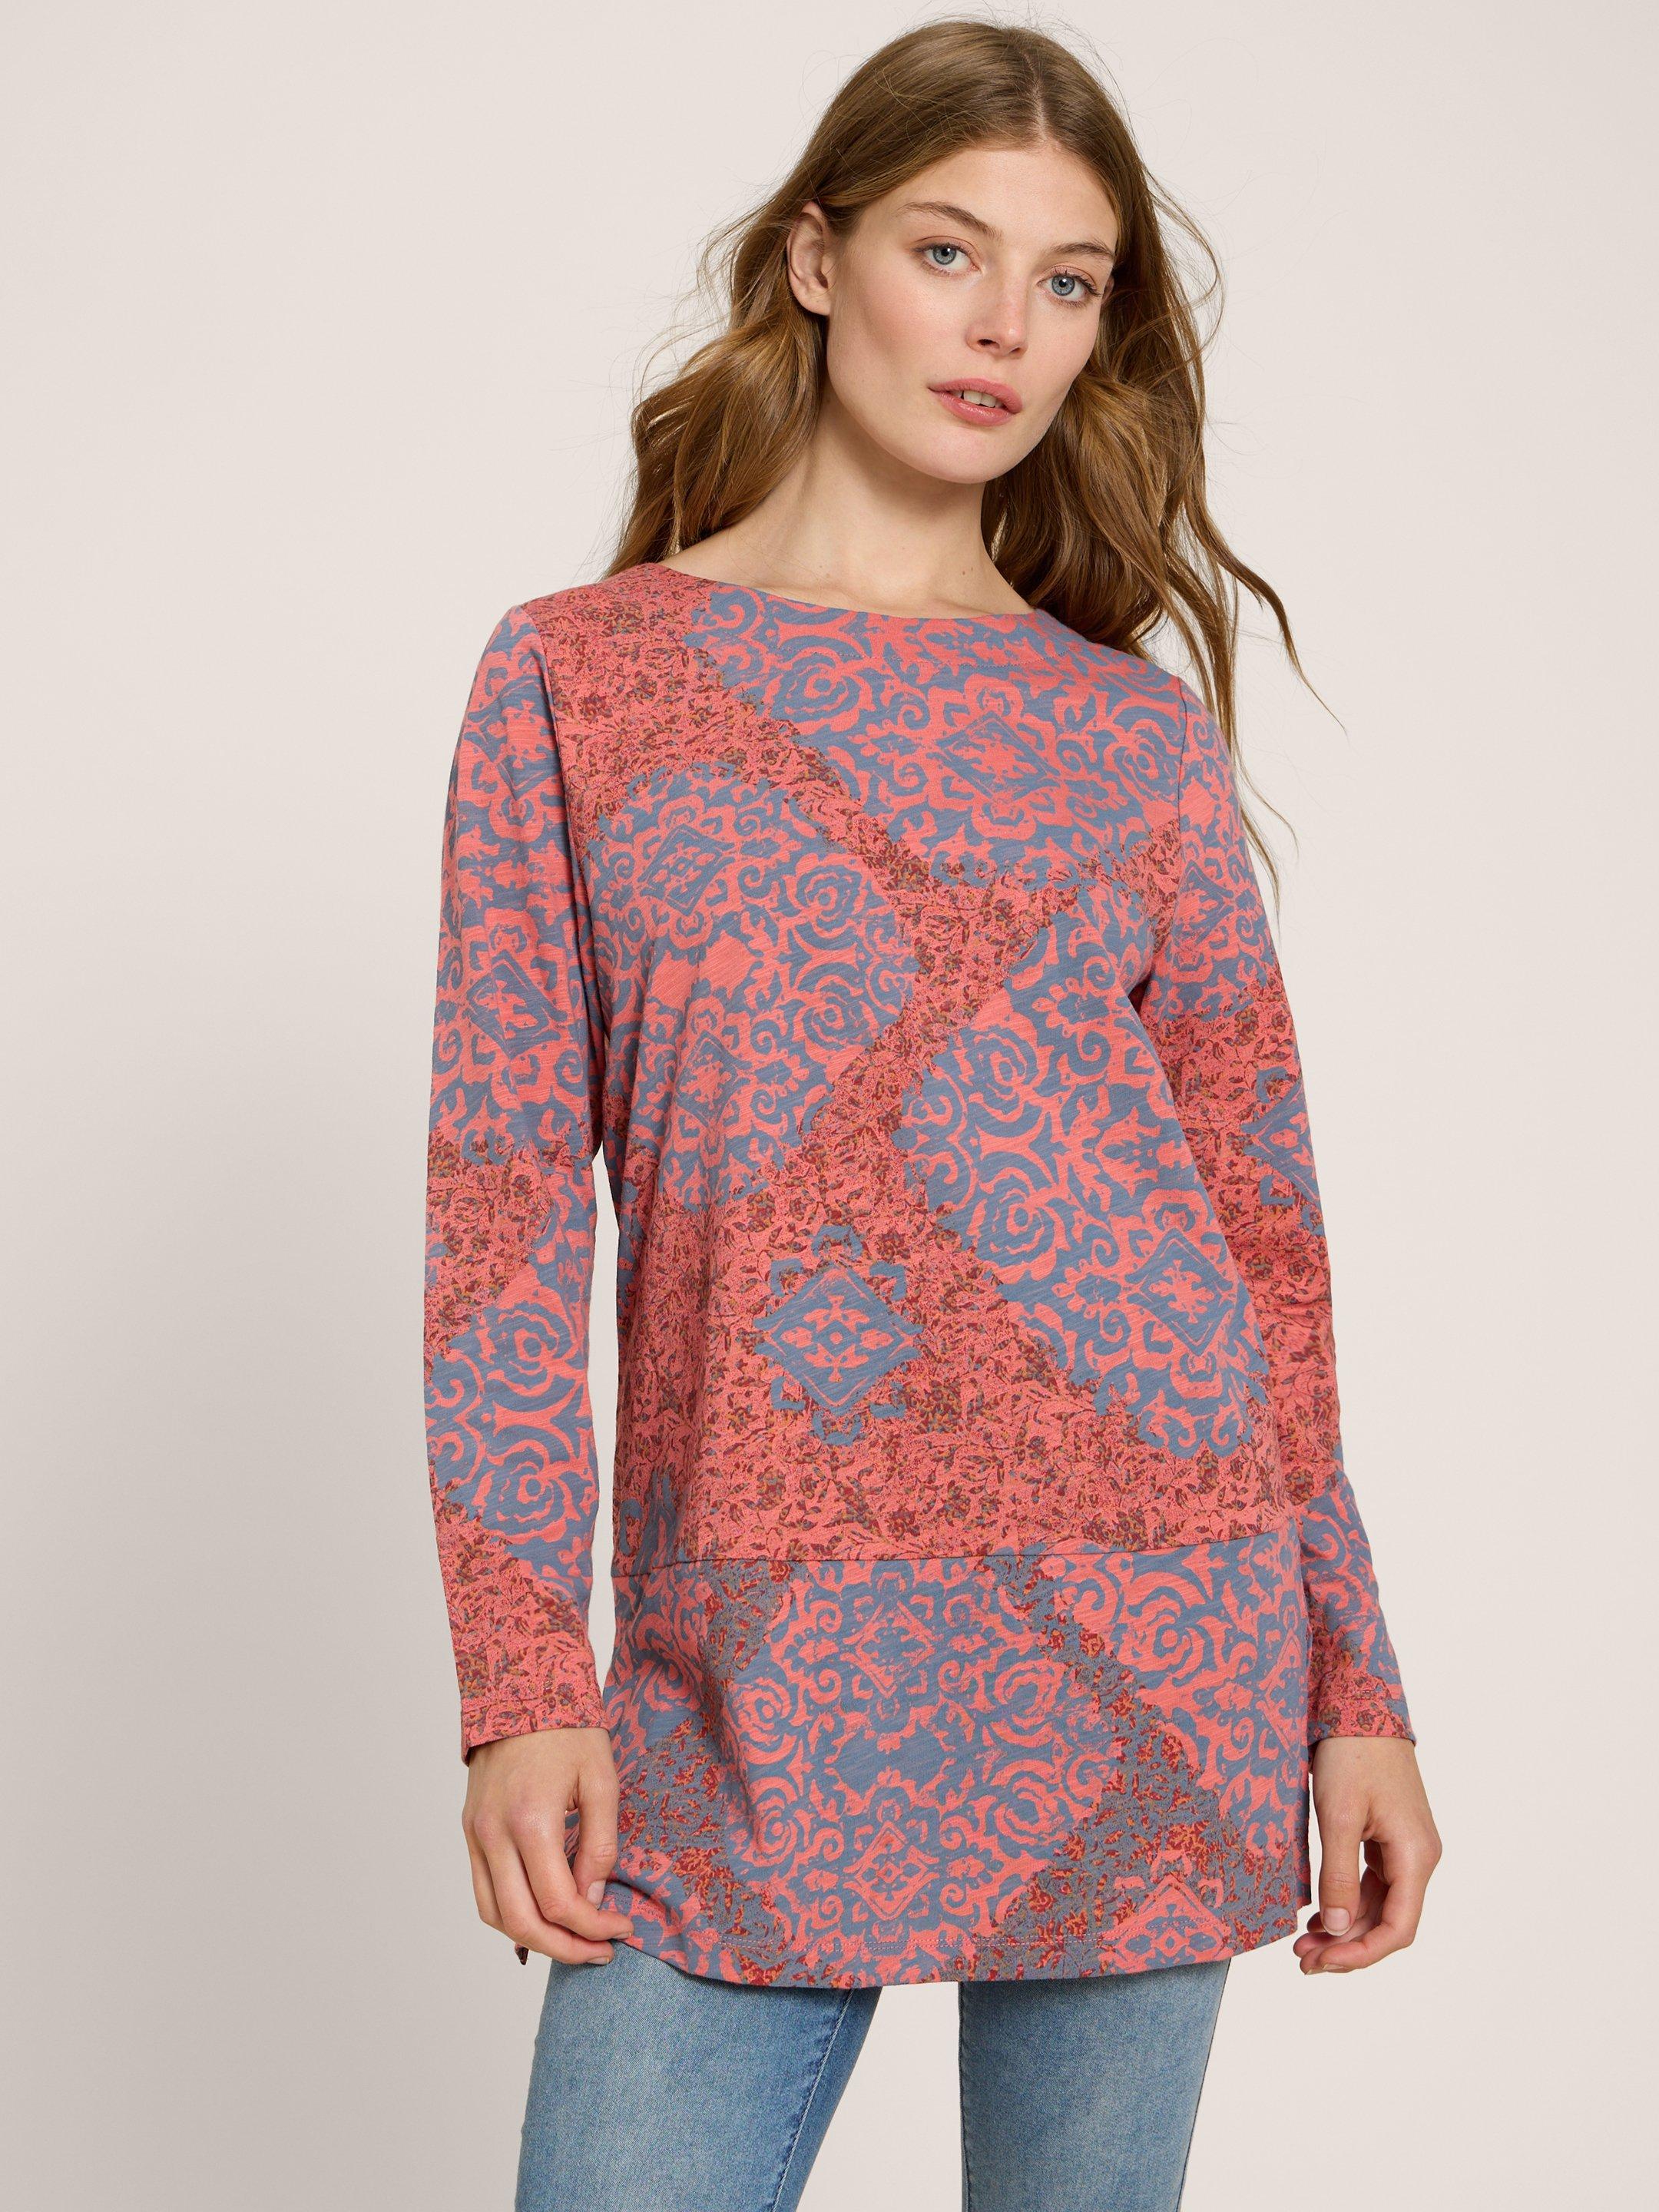 CARRIE LS TUNIC in RED PR - MODEL FRONT